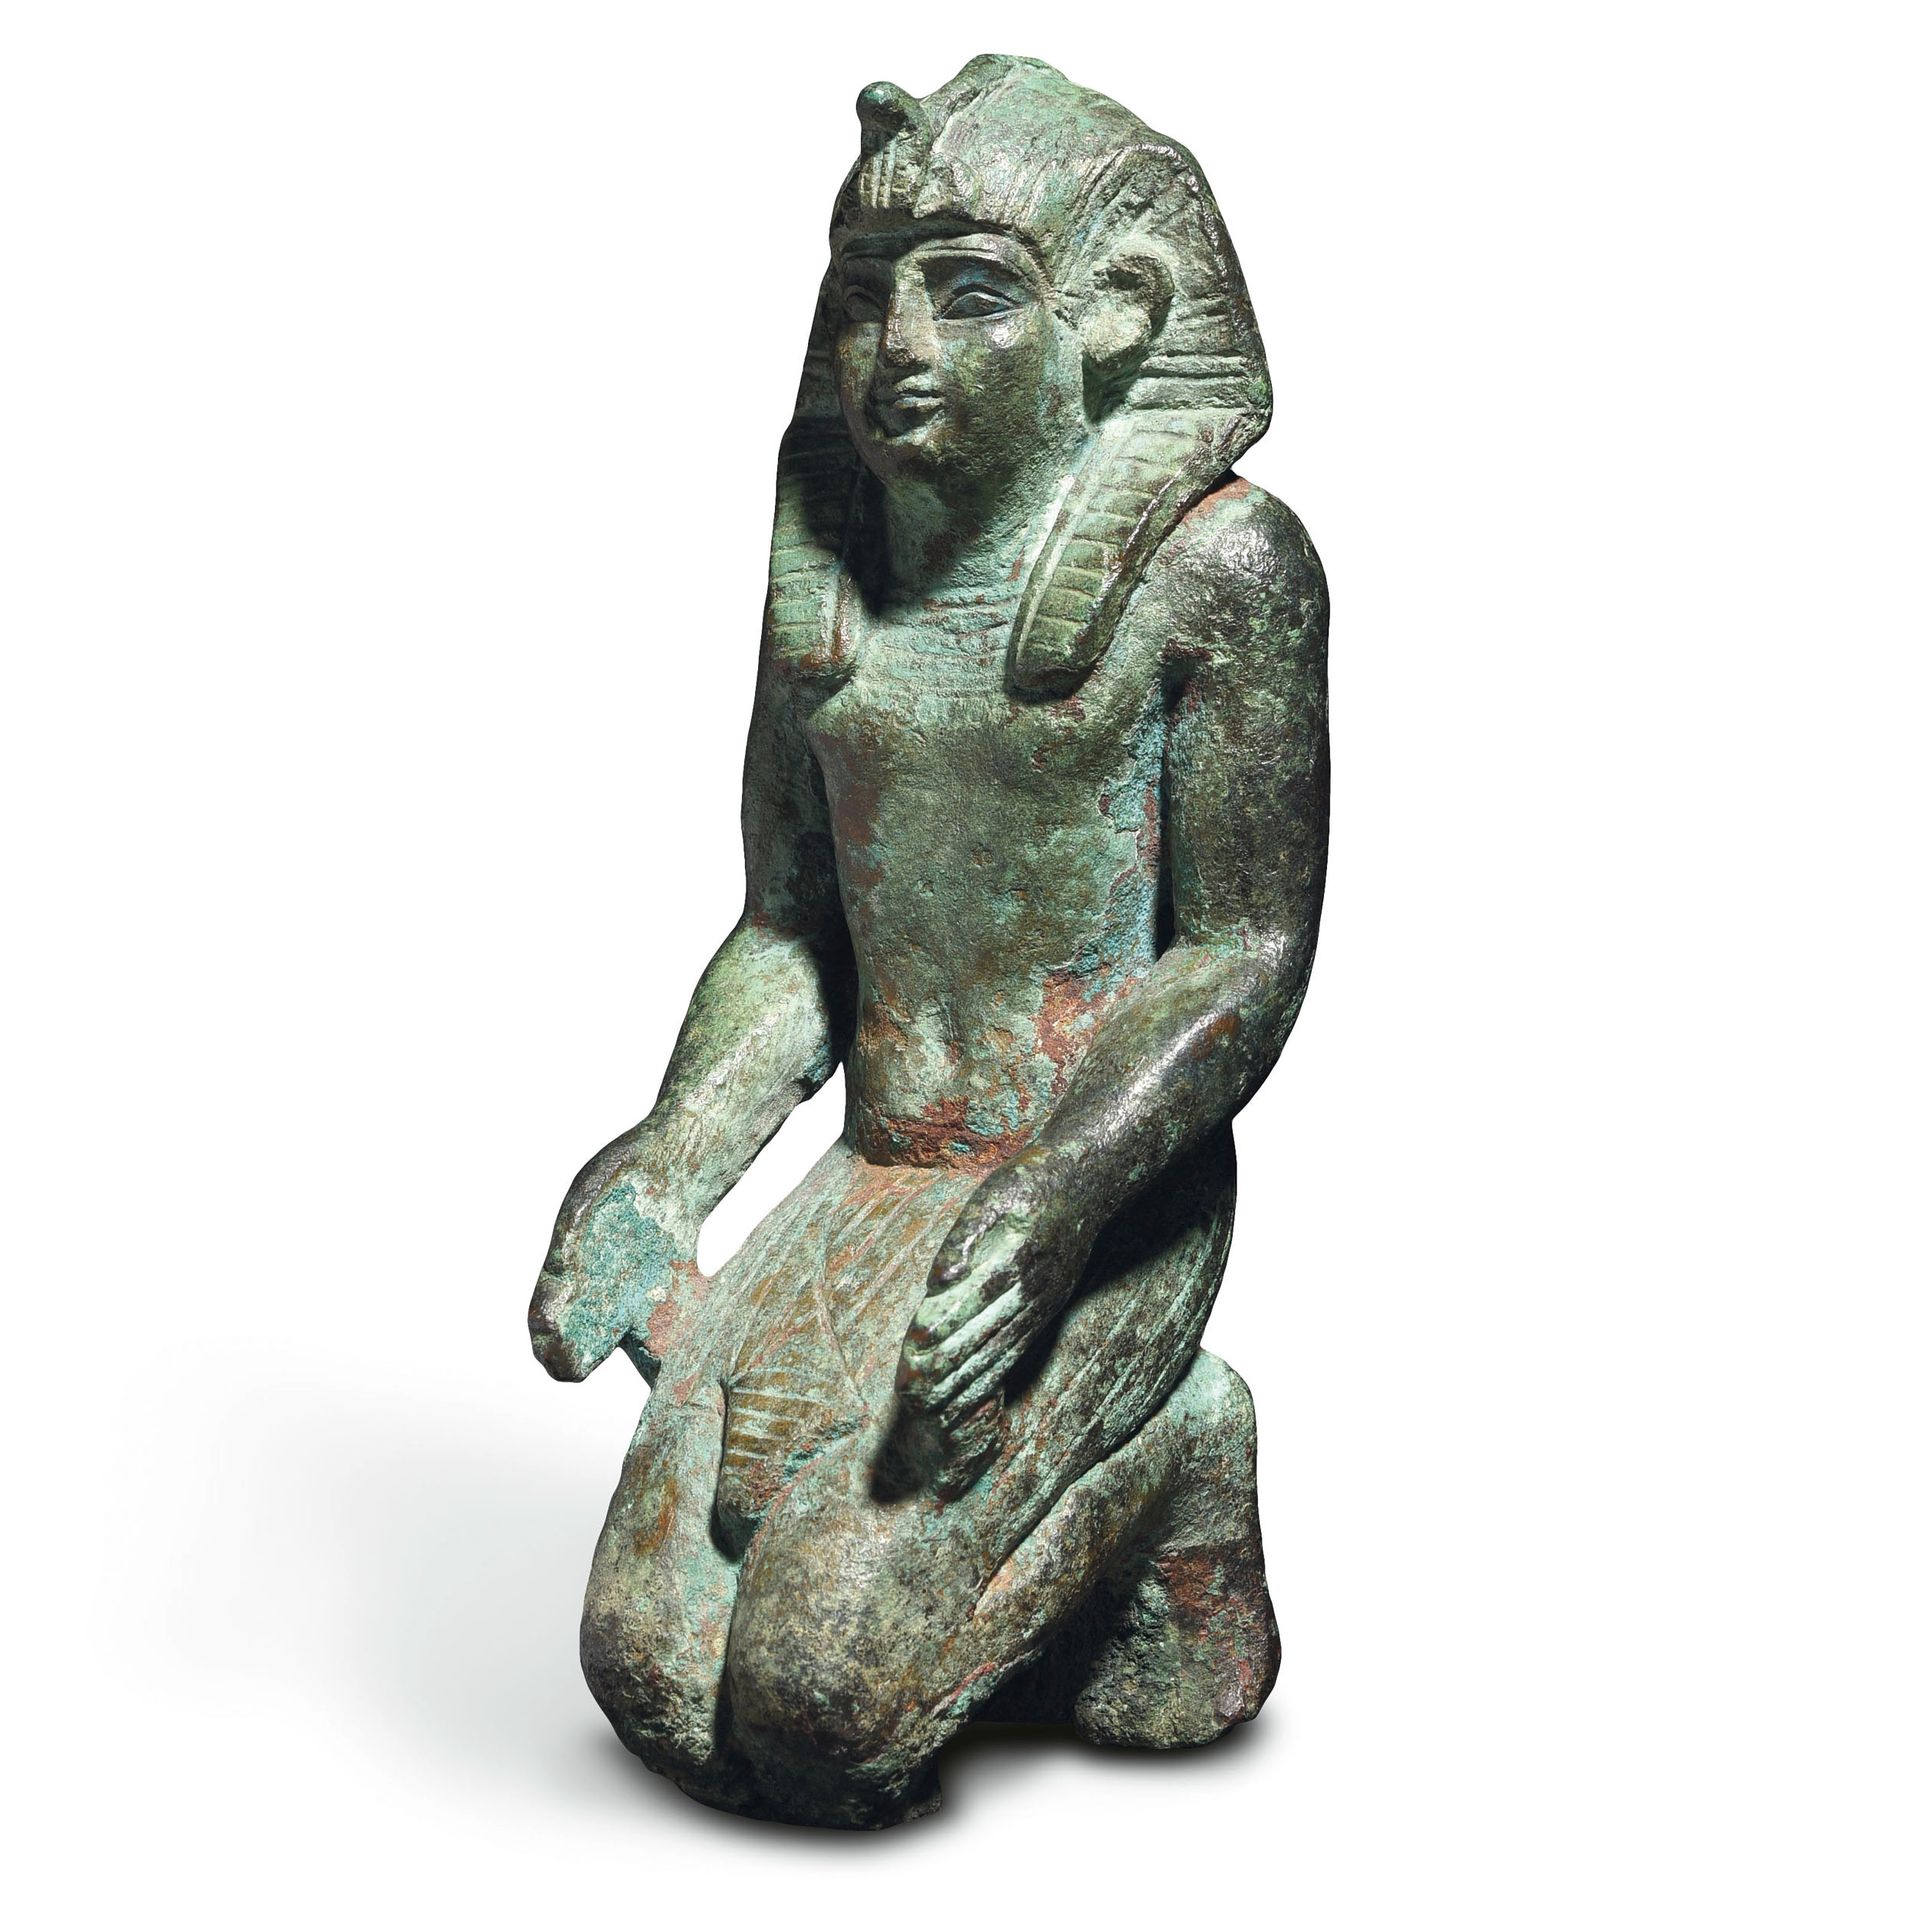 Null STATUETTE OF A KNEELING PHARAOH

Egypt, Late Period, 664-332 B.C. 

Bronze
&hellip;